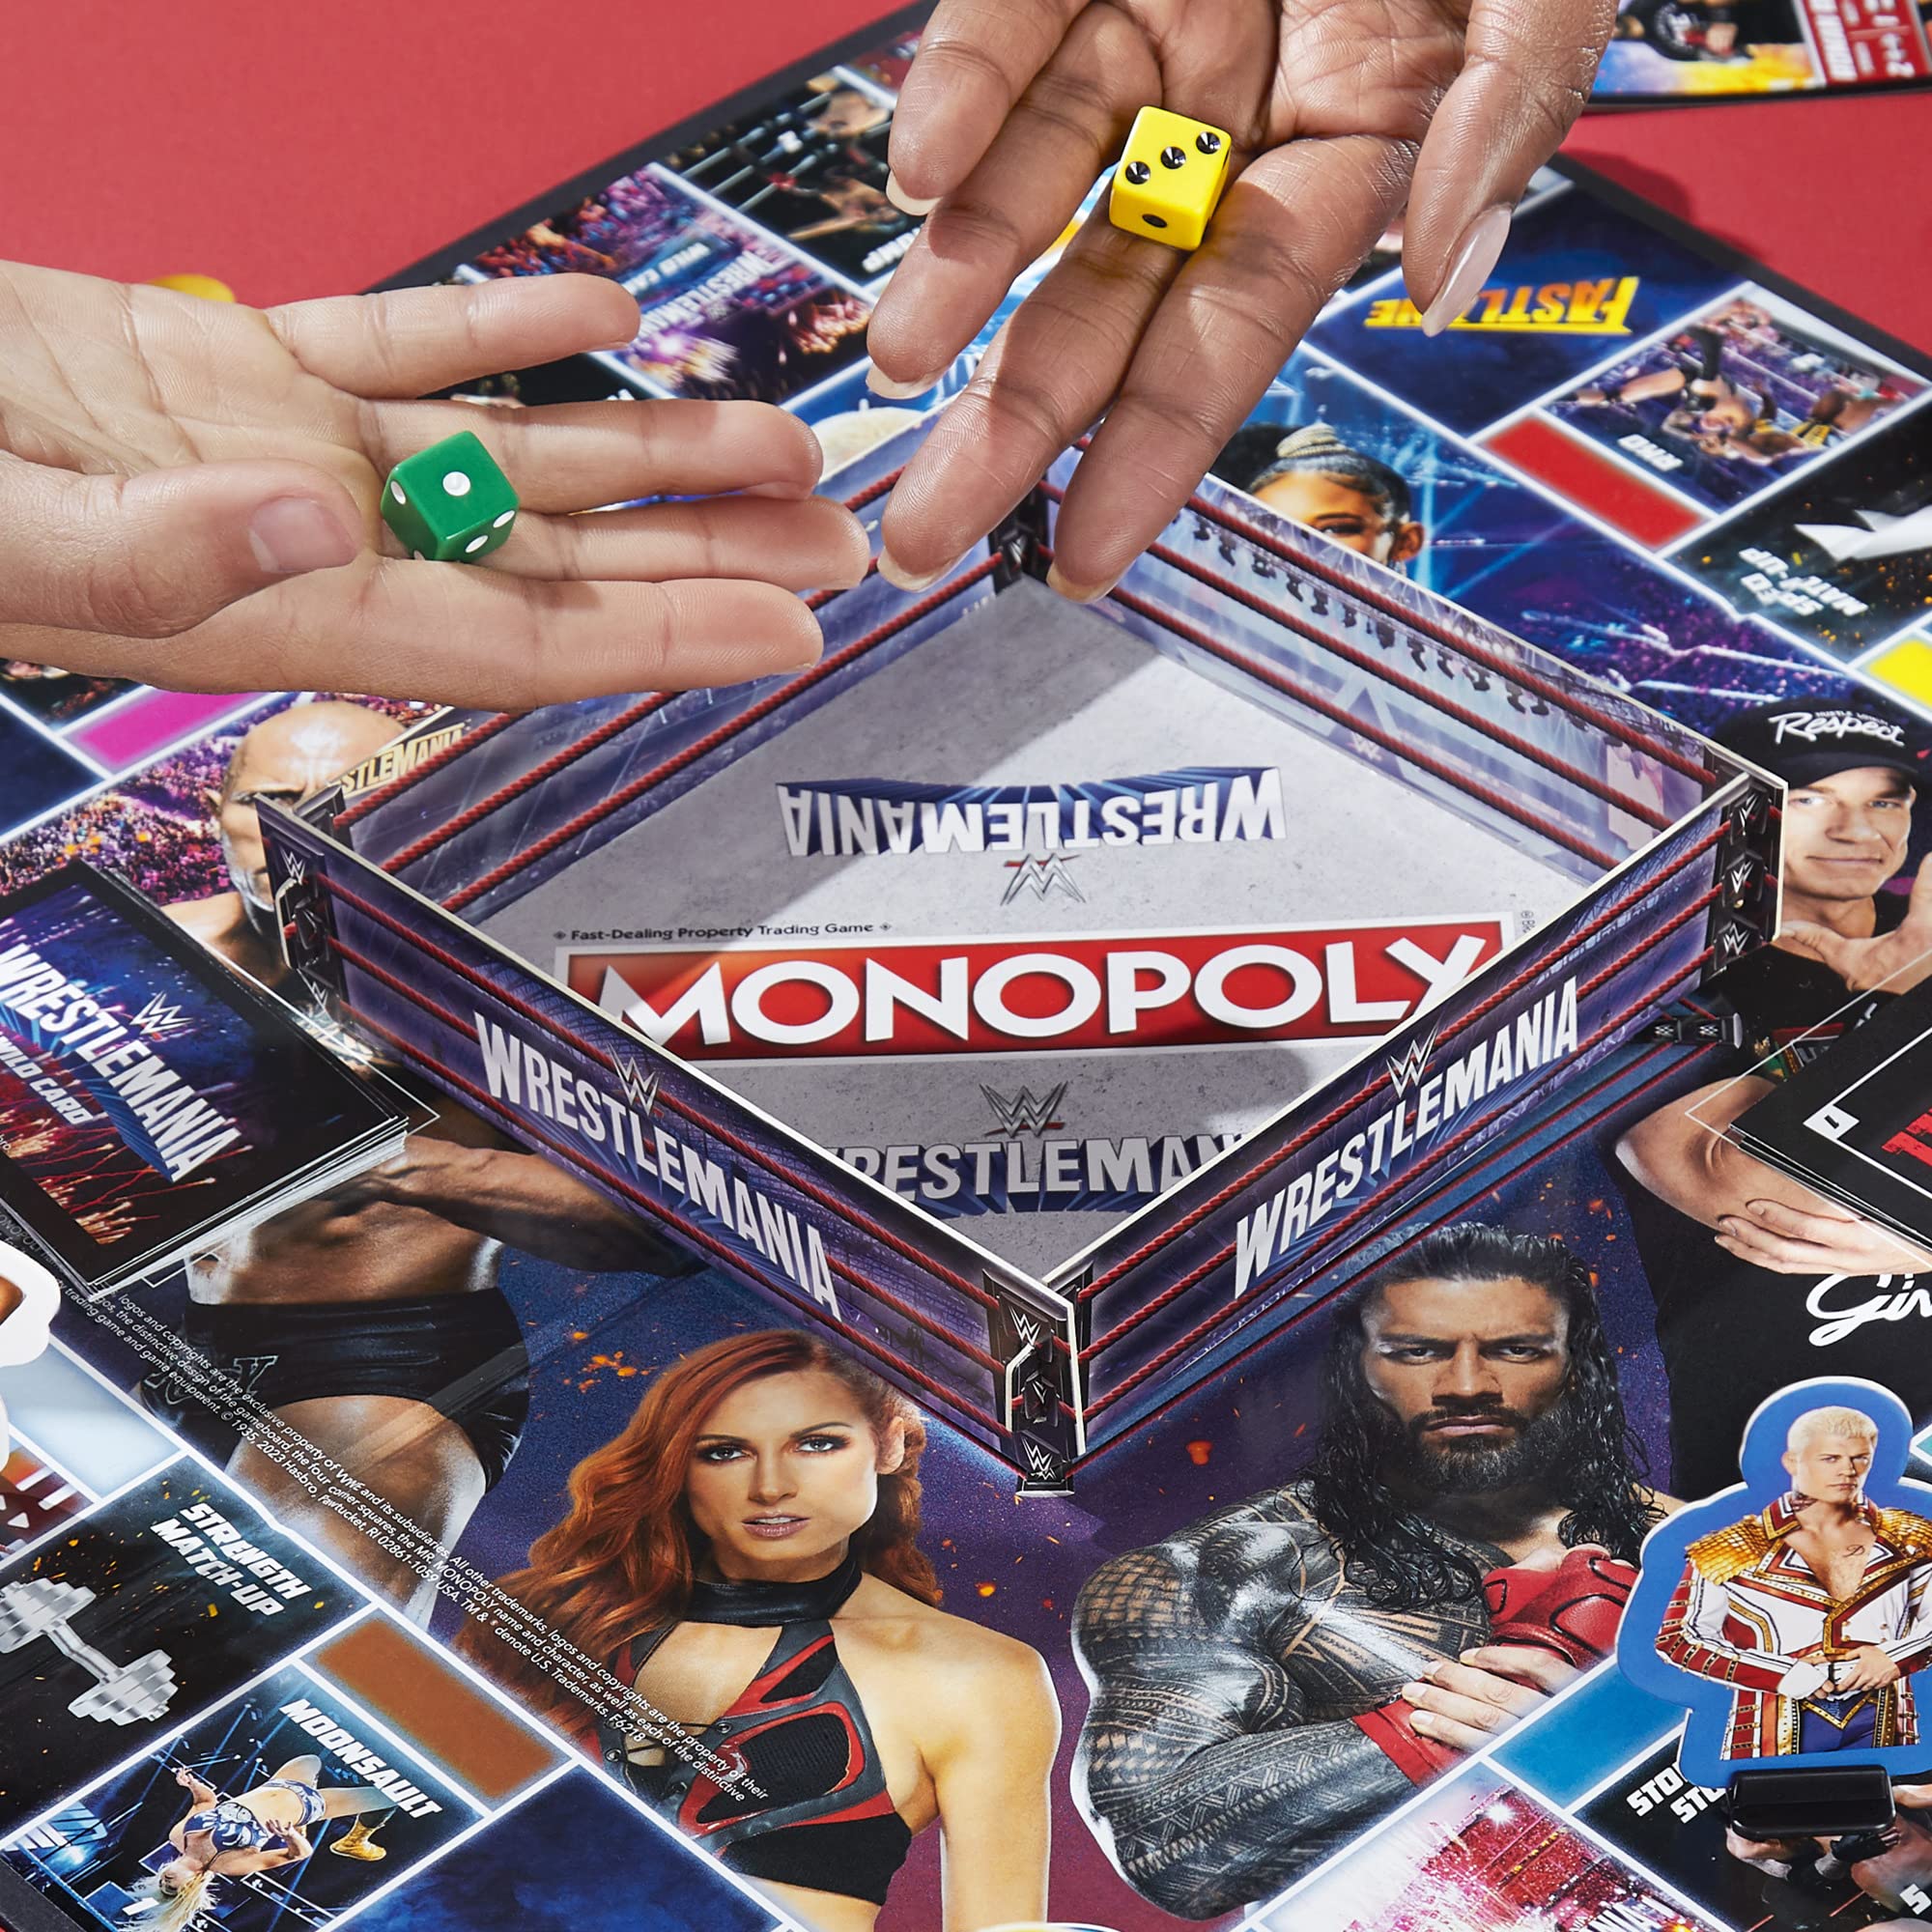 Monopoly: Wrestlemania Edition Board Game for Ages 8 and up, Monopoly Game Inspired by WWE Wrestlemania, Family Games for 2-6 Players, Kids Games